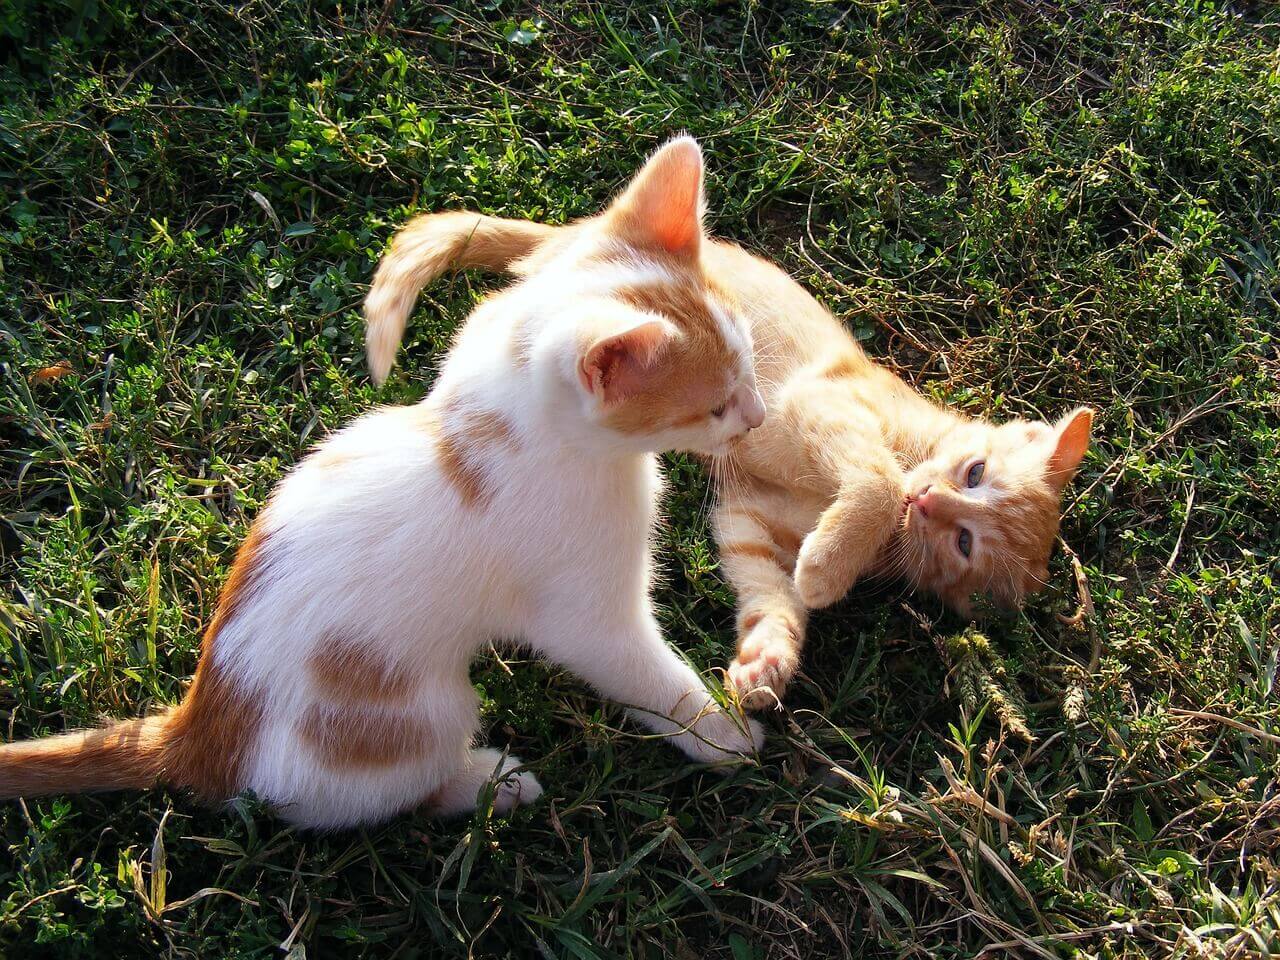 Two kittens playing in the grass.